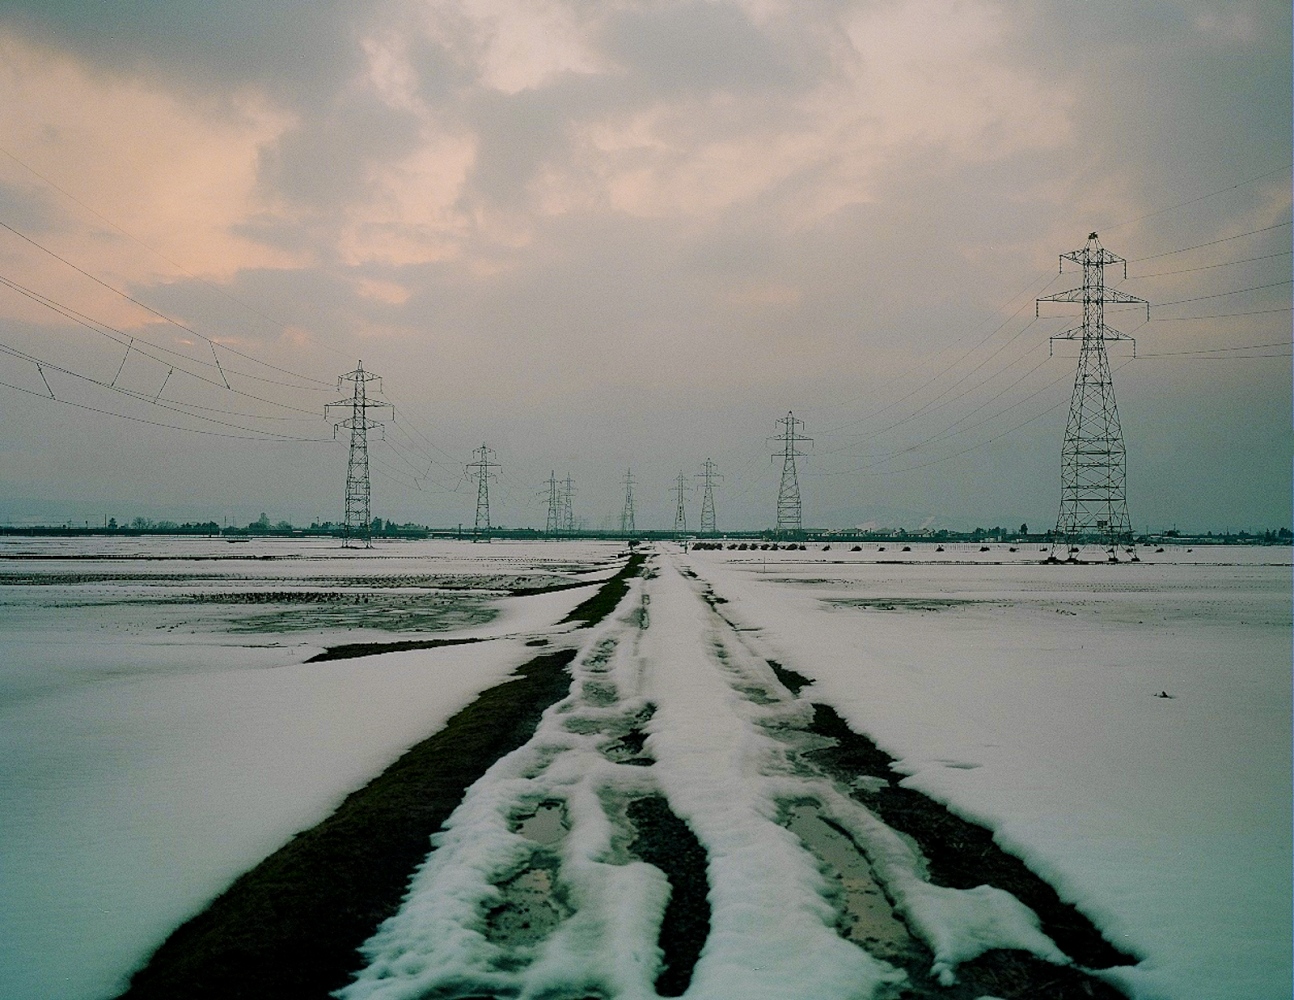 Life within 90 km -  Electric towers line the landscape of a snow covered sea...